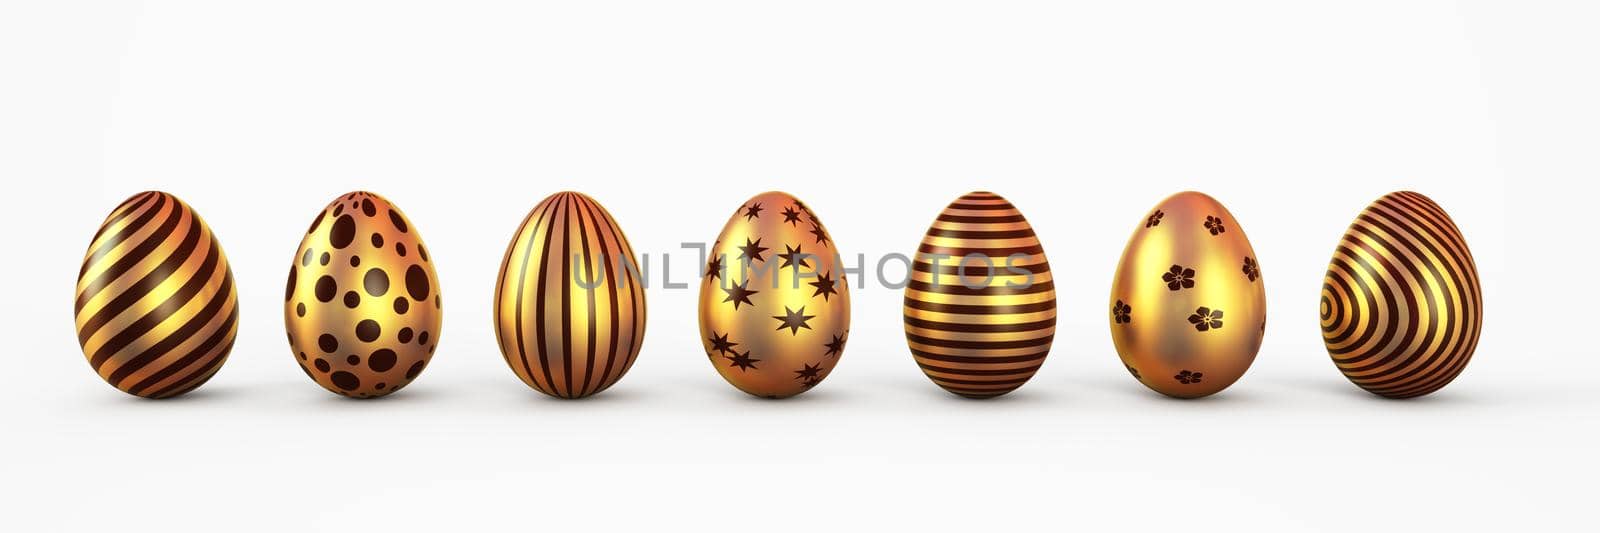 Gold easter eggs with patten set isolated on white background. 3D rendering illustration.